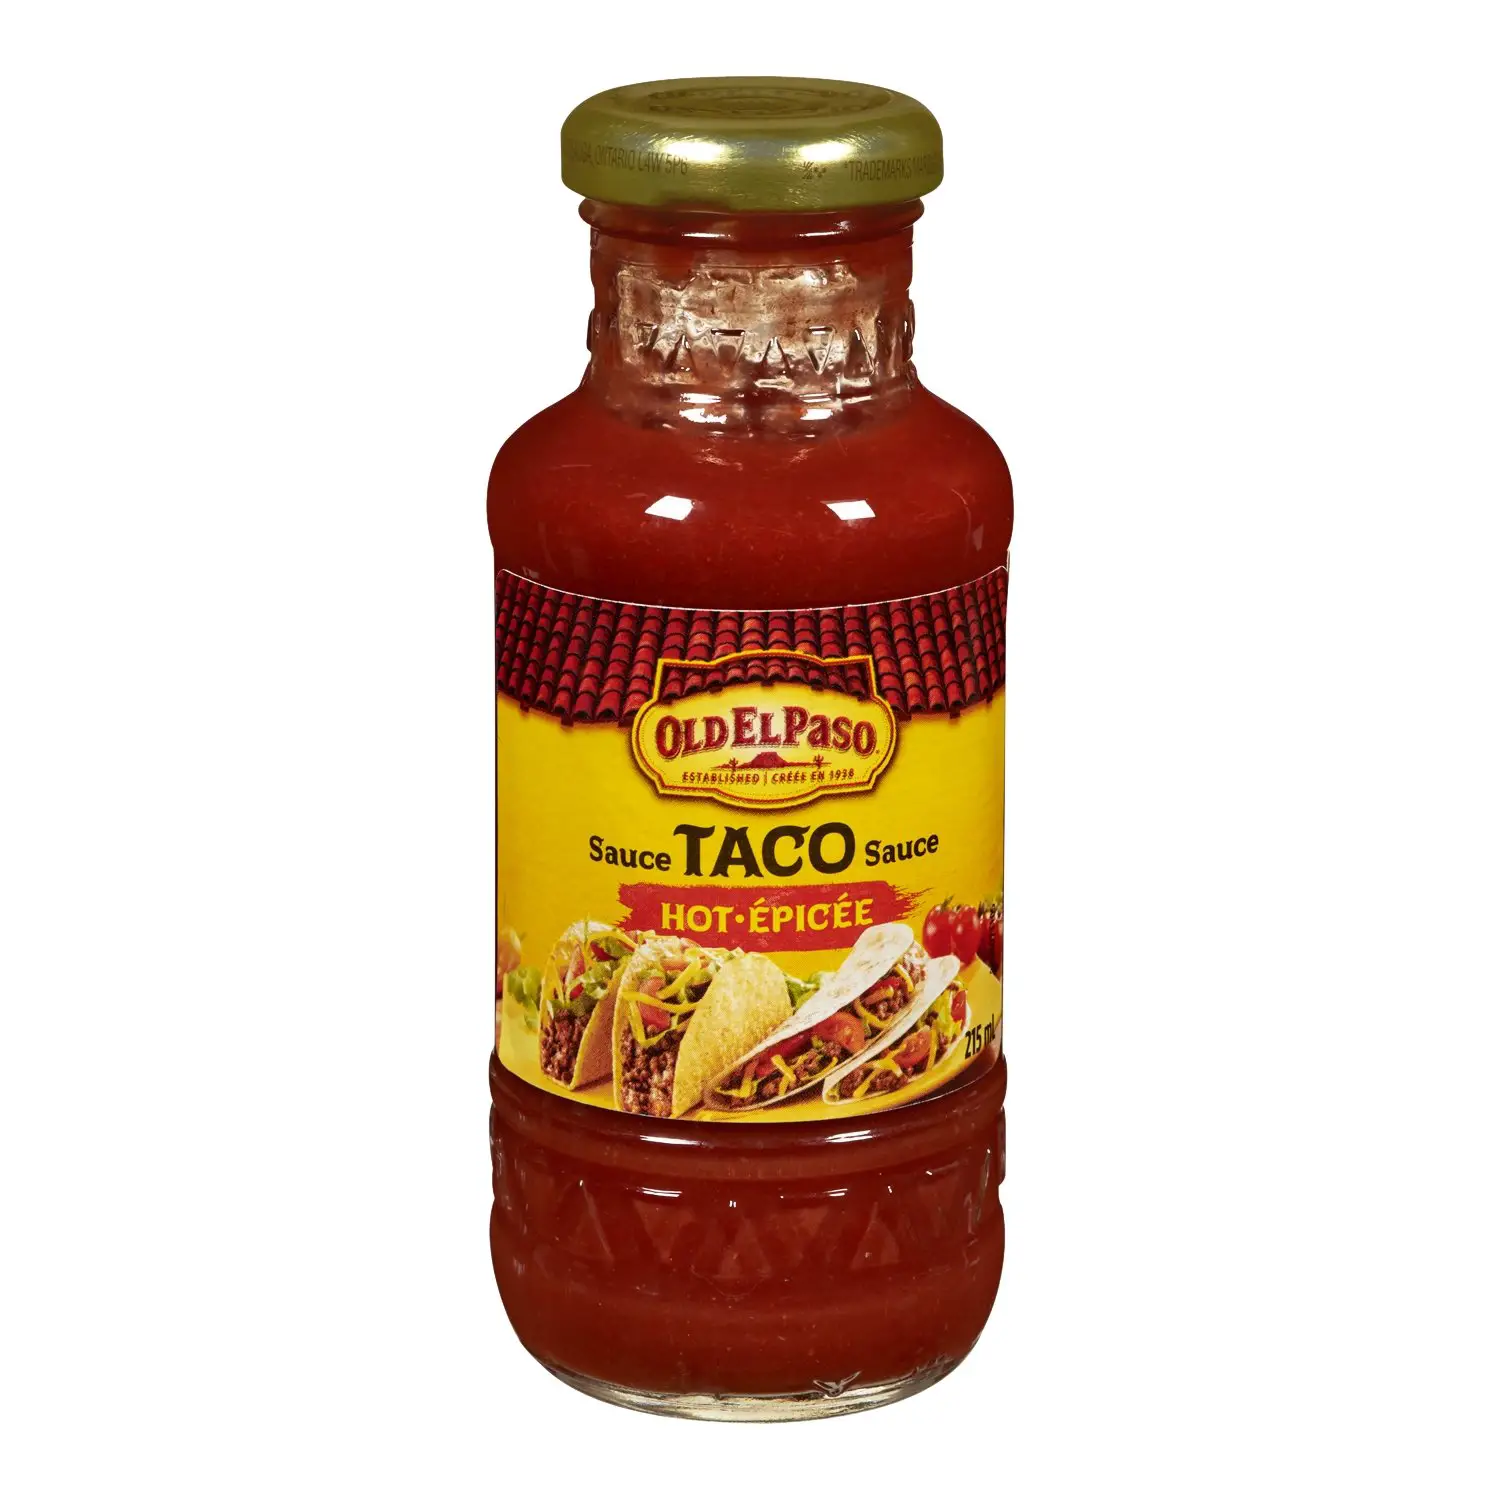 Old El Paso Taco Hot Sauce, 215ml/7.3 fl oz. {Imported from Canada}